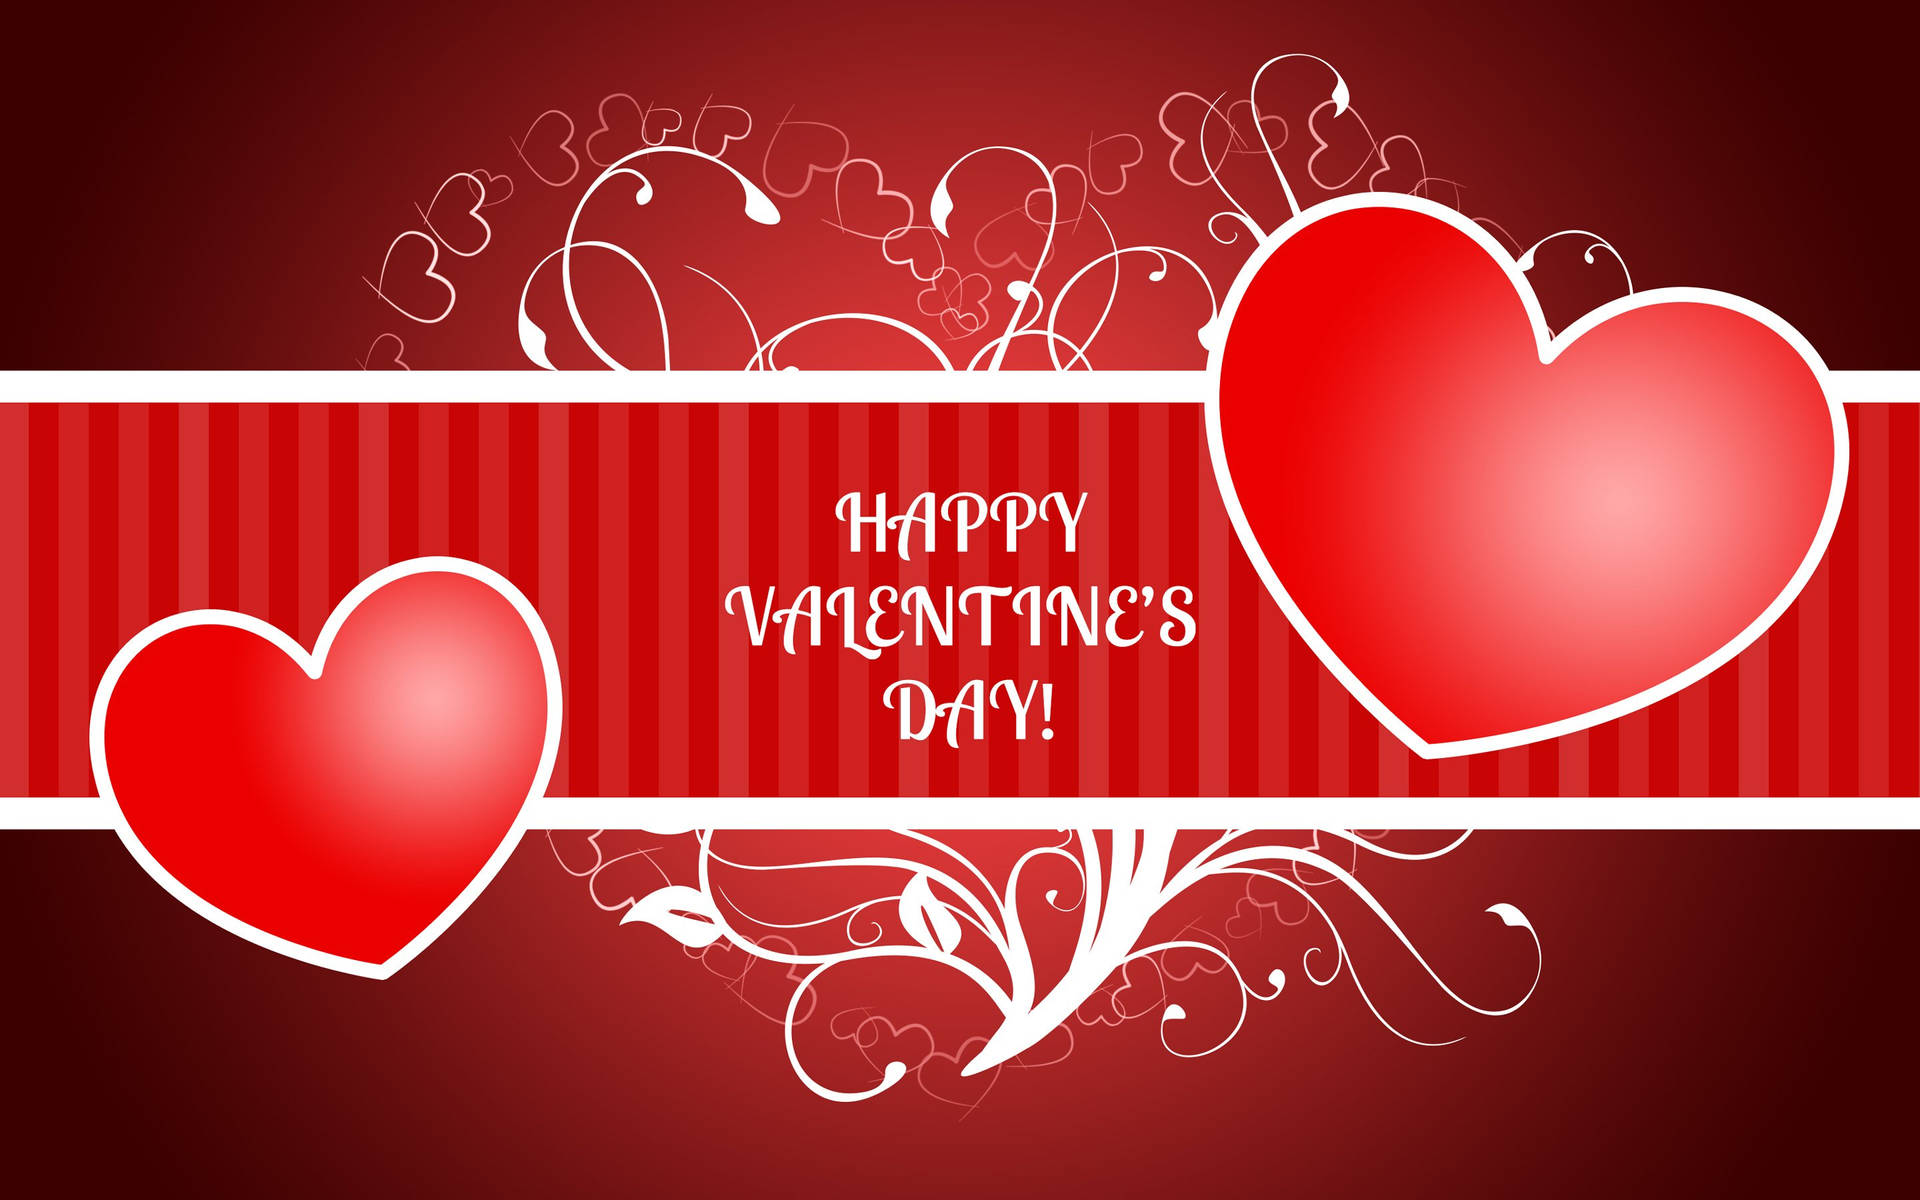 Happy Valentine's Day With Two Red Hearts Background